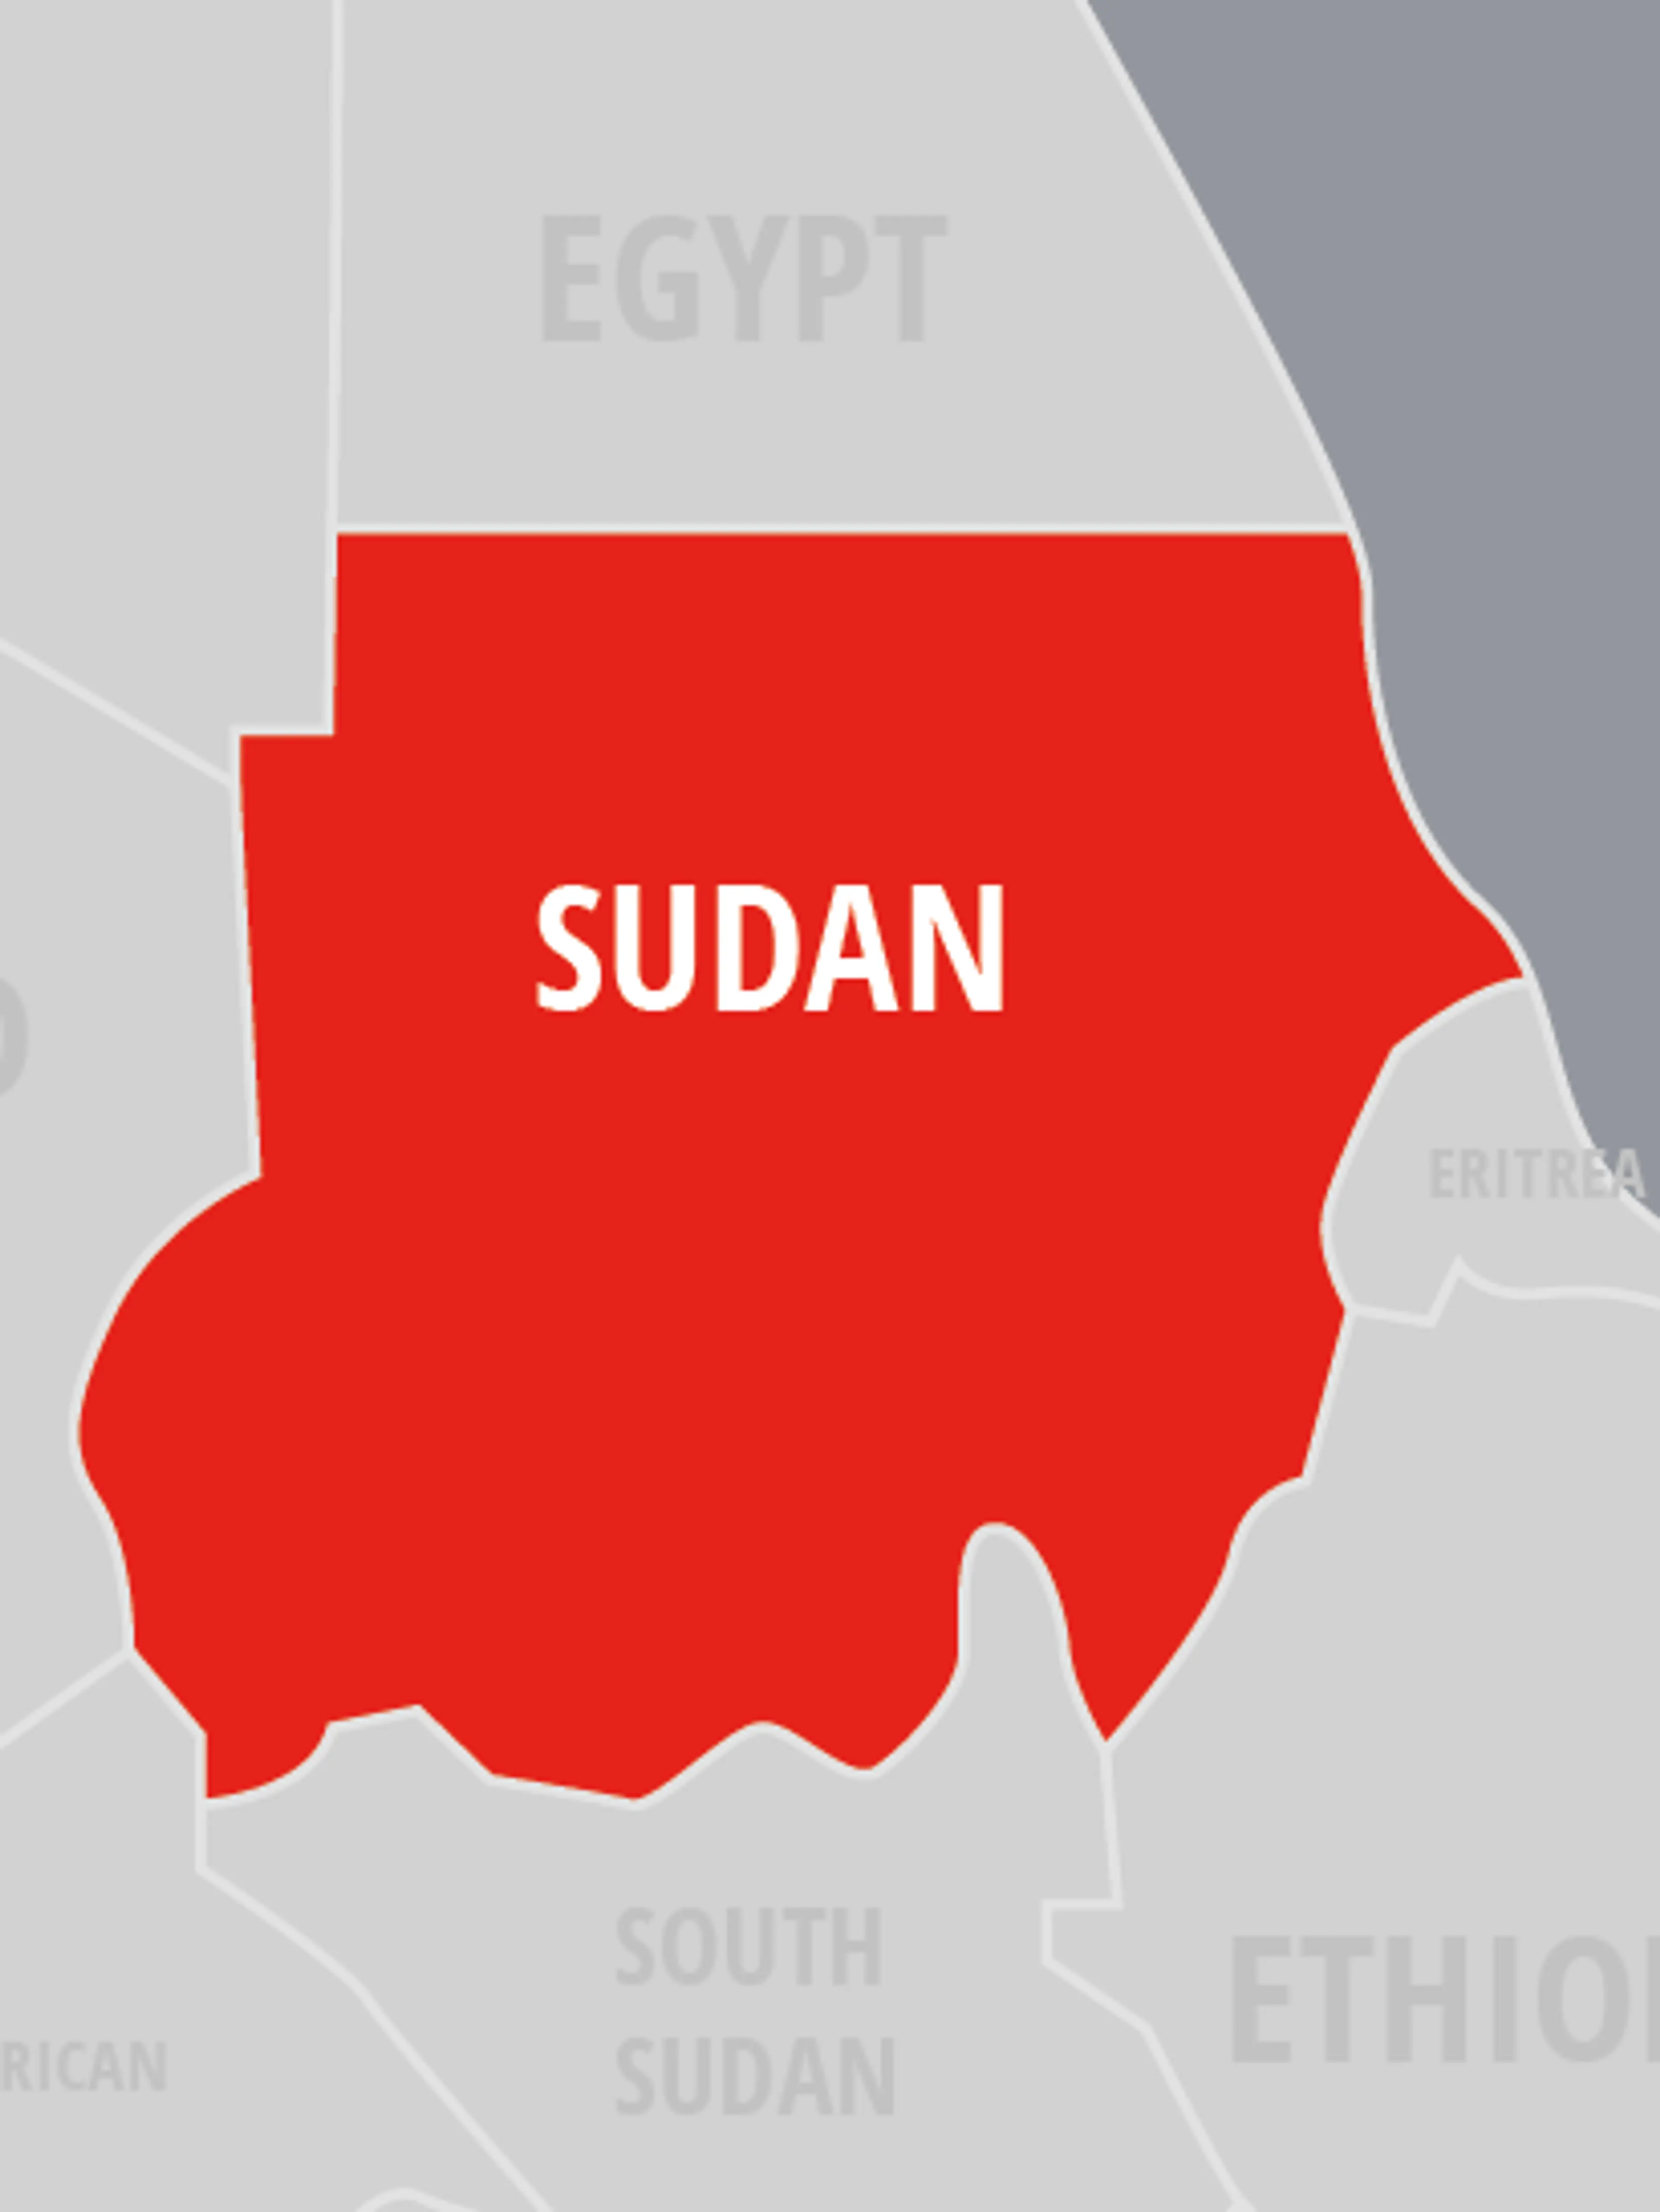 Act today to help the people of Sudan